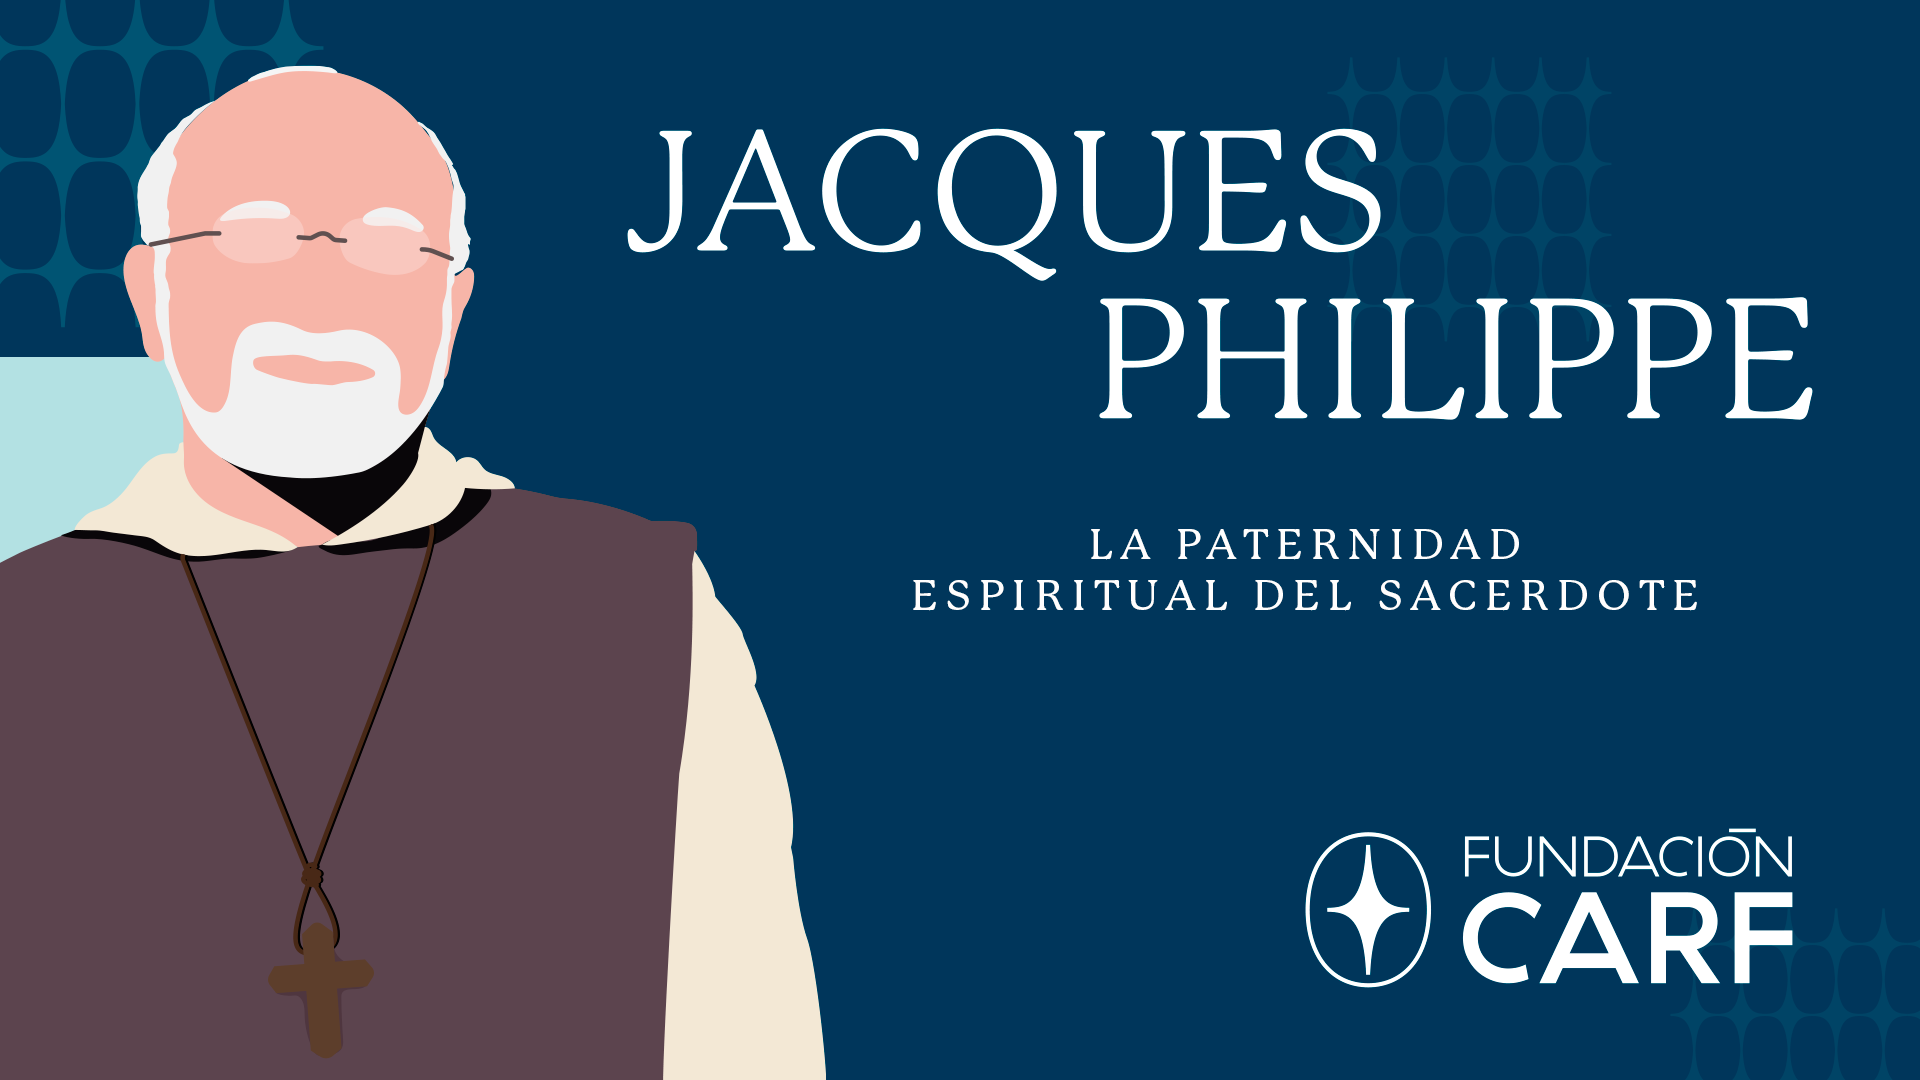 jacques philippe